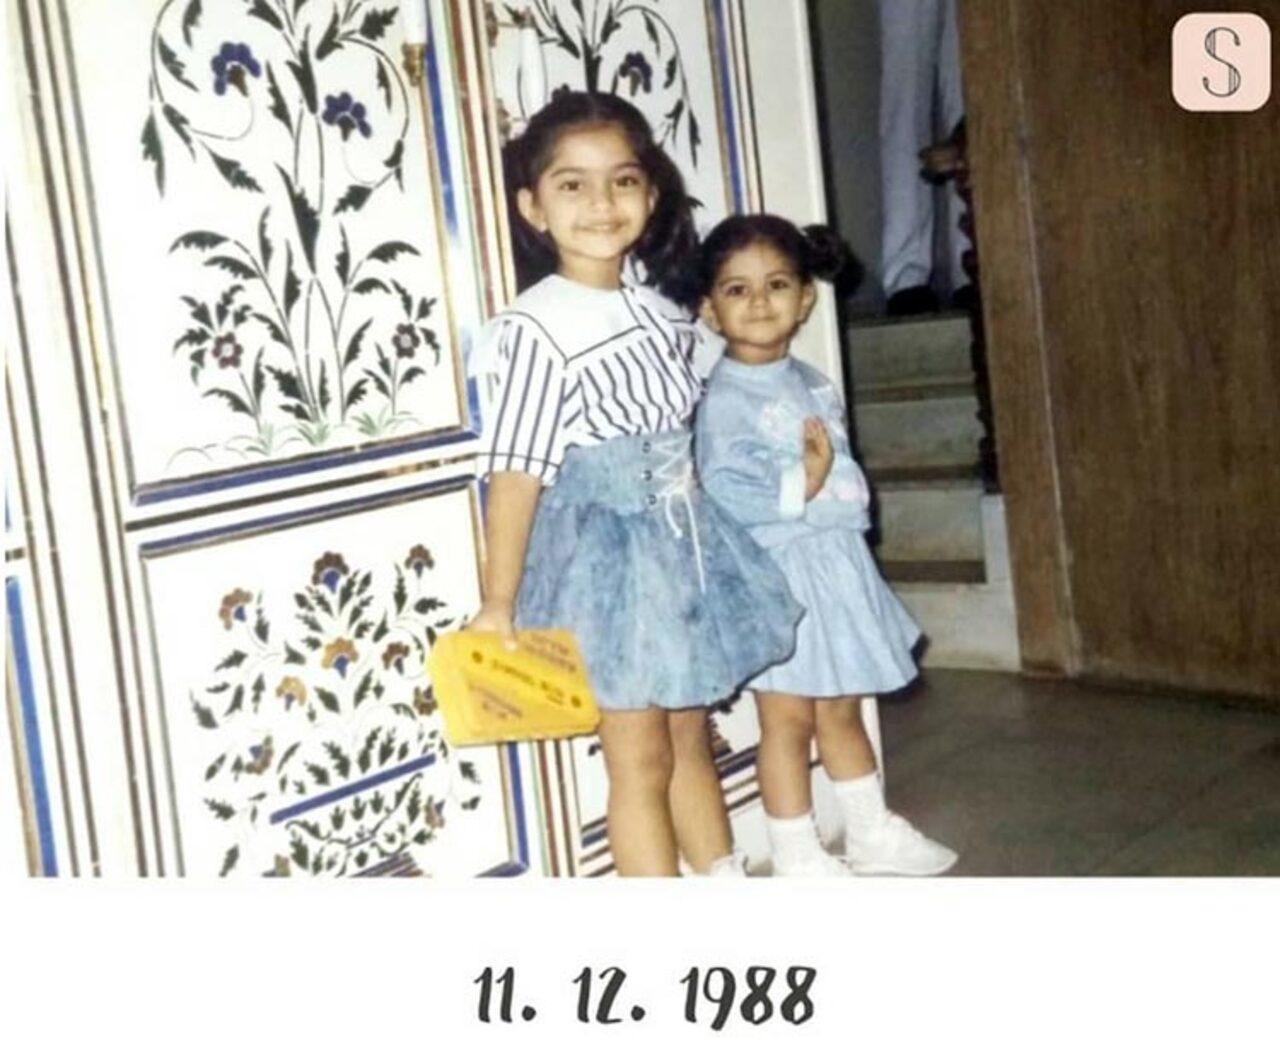 Sonam and Rhea Kapoor look like porcelain dolls in this photo. However, Sonam attests that they were definitely up to something mischievous! “We may look super innocent but I can tell we were up to something naughty in this photo!